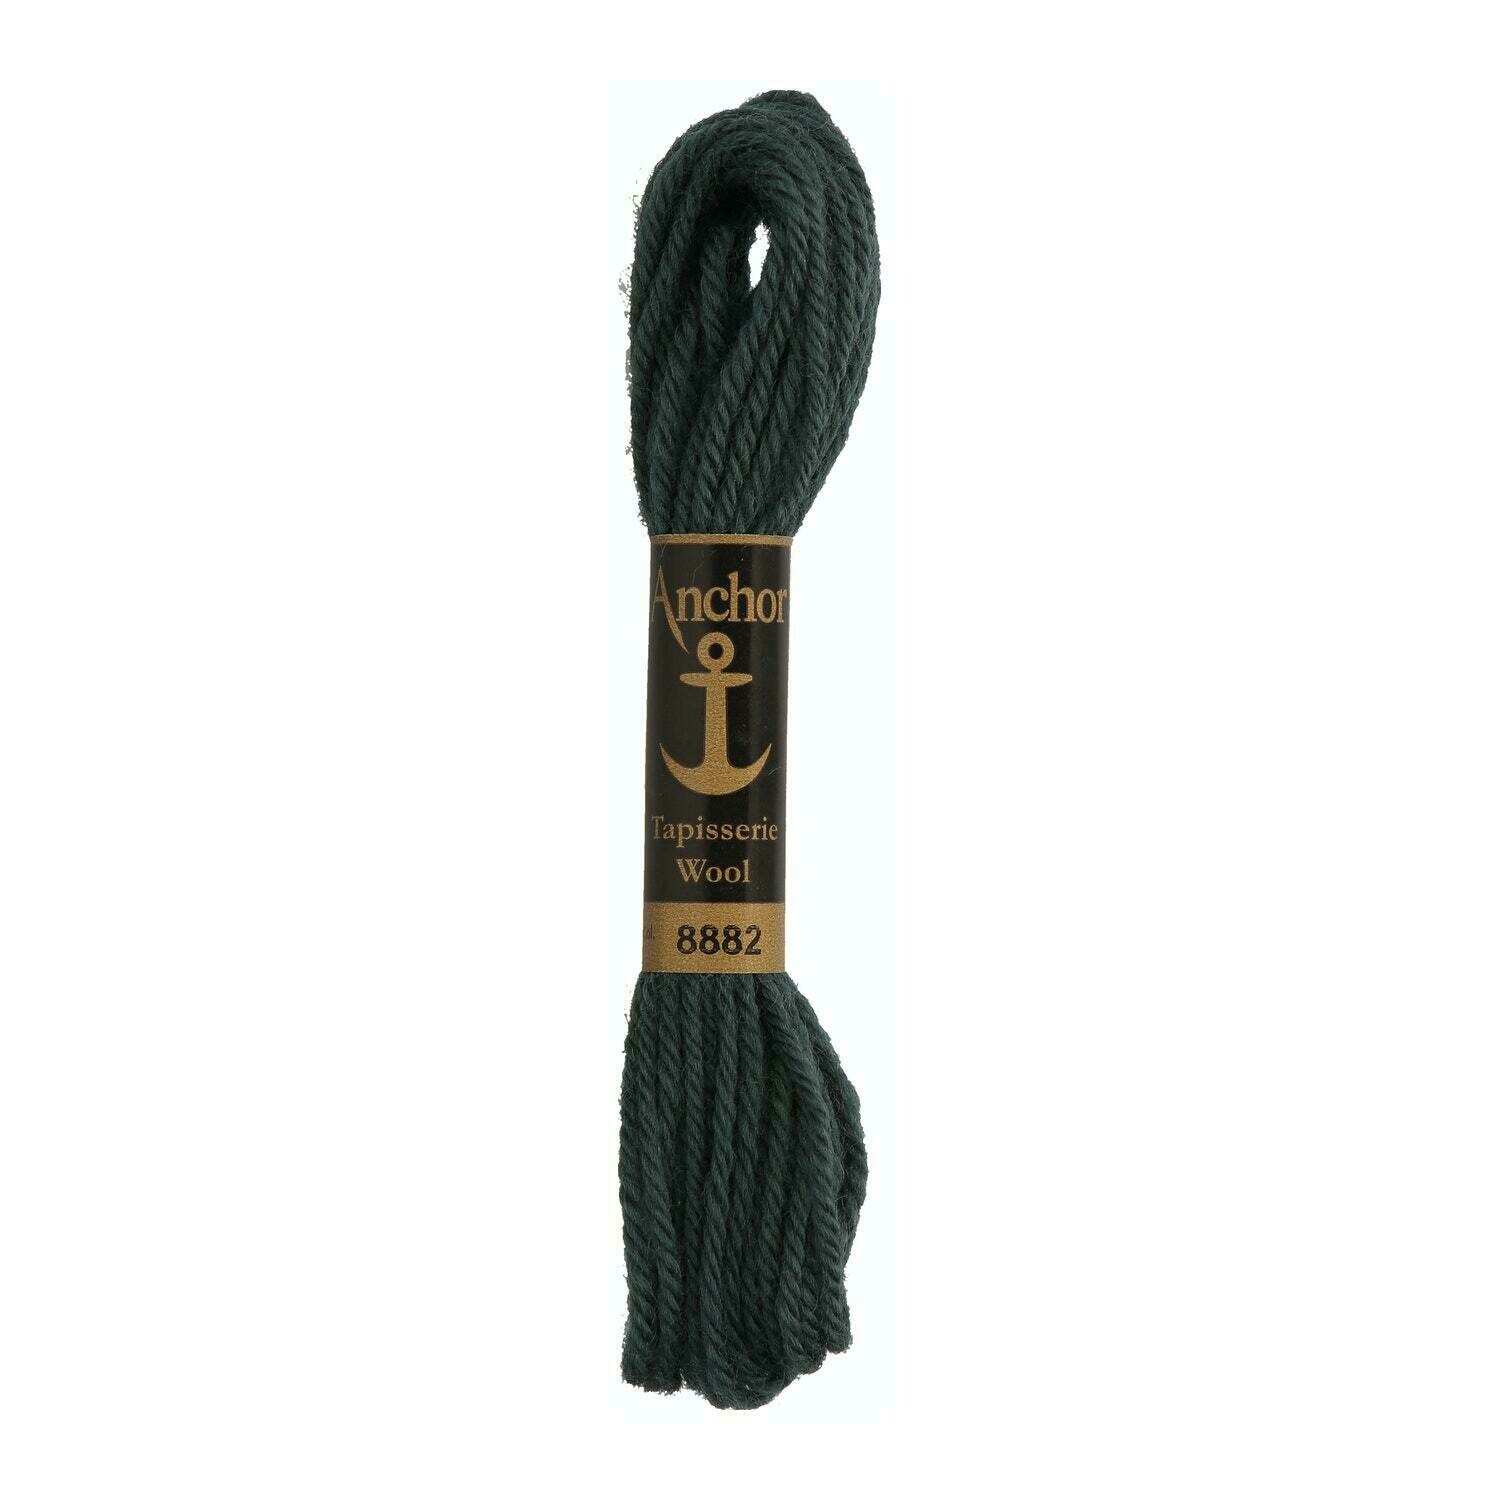 Anchor Tapisserie Wool #08932